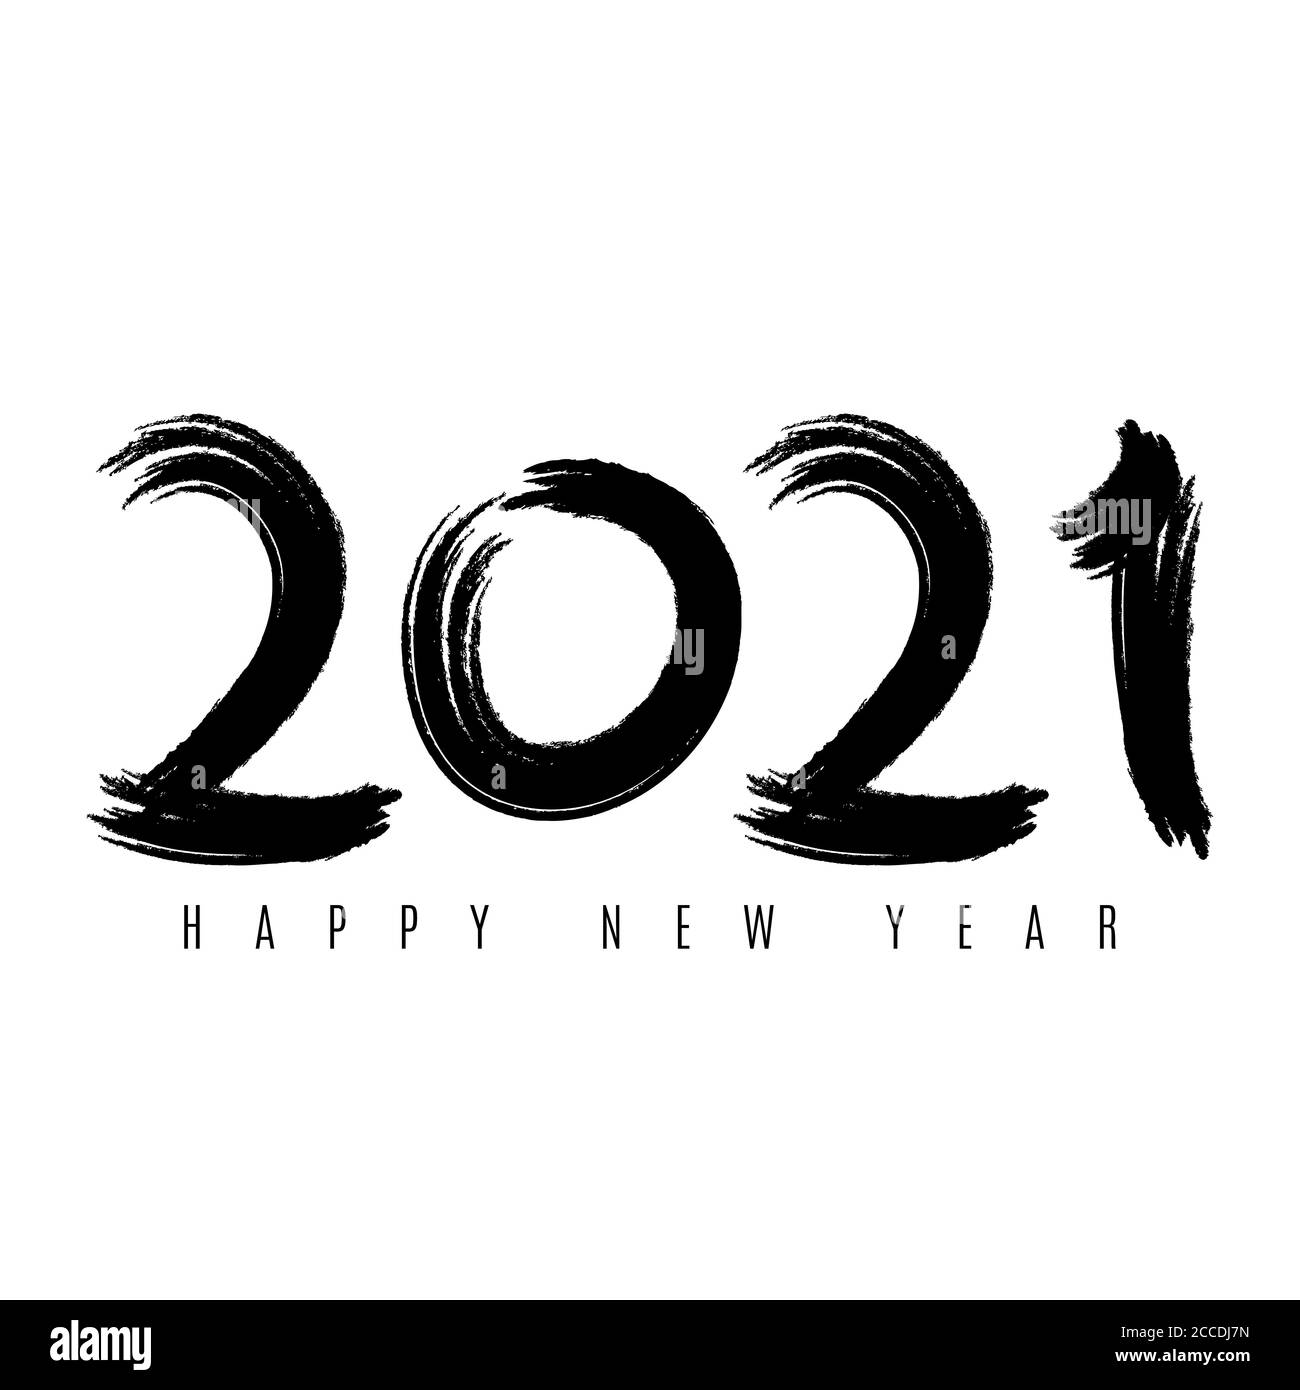 Happy Chinese New Year 2021. Black number in grunge style isolated on white background. Vector illustration. EPS 10. Stock Vector